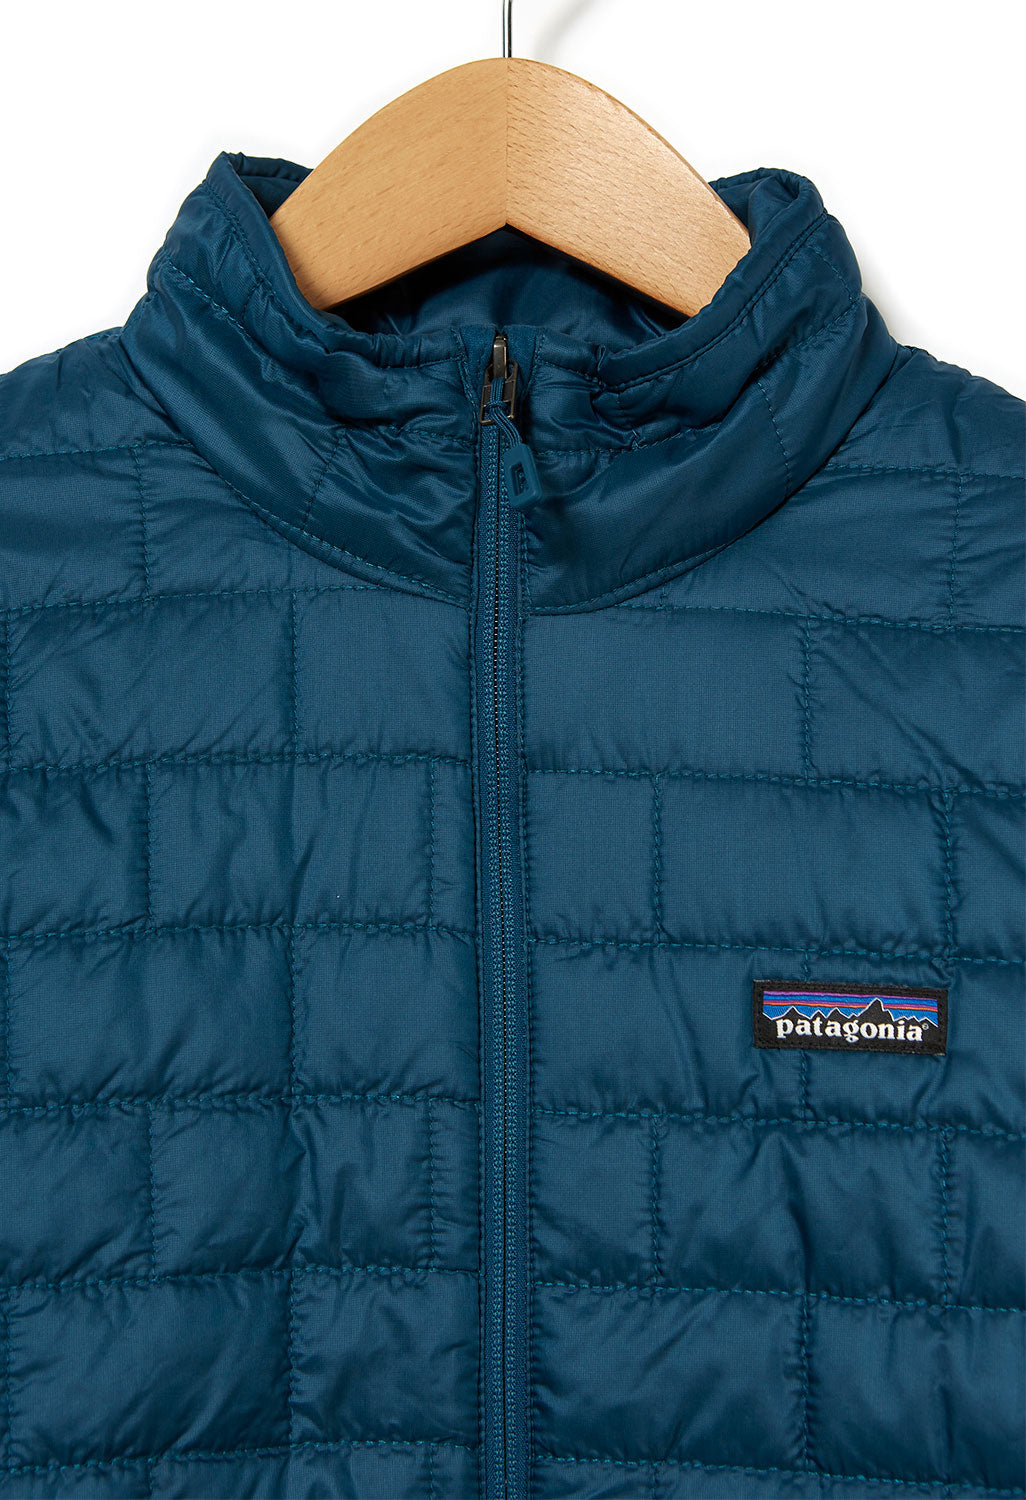 Patagonia Nano Puff Men's Insulated Jacket - Crater Blue